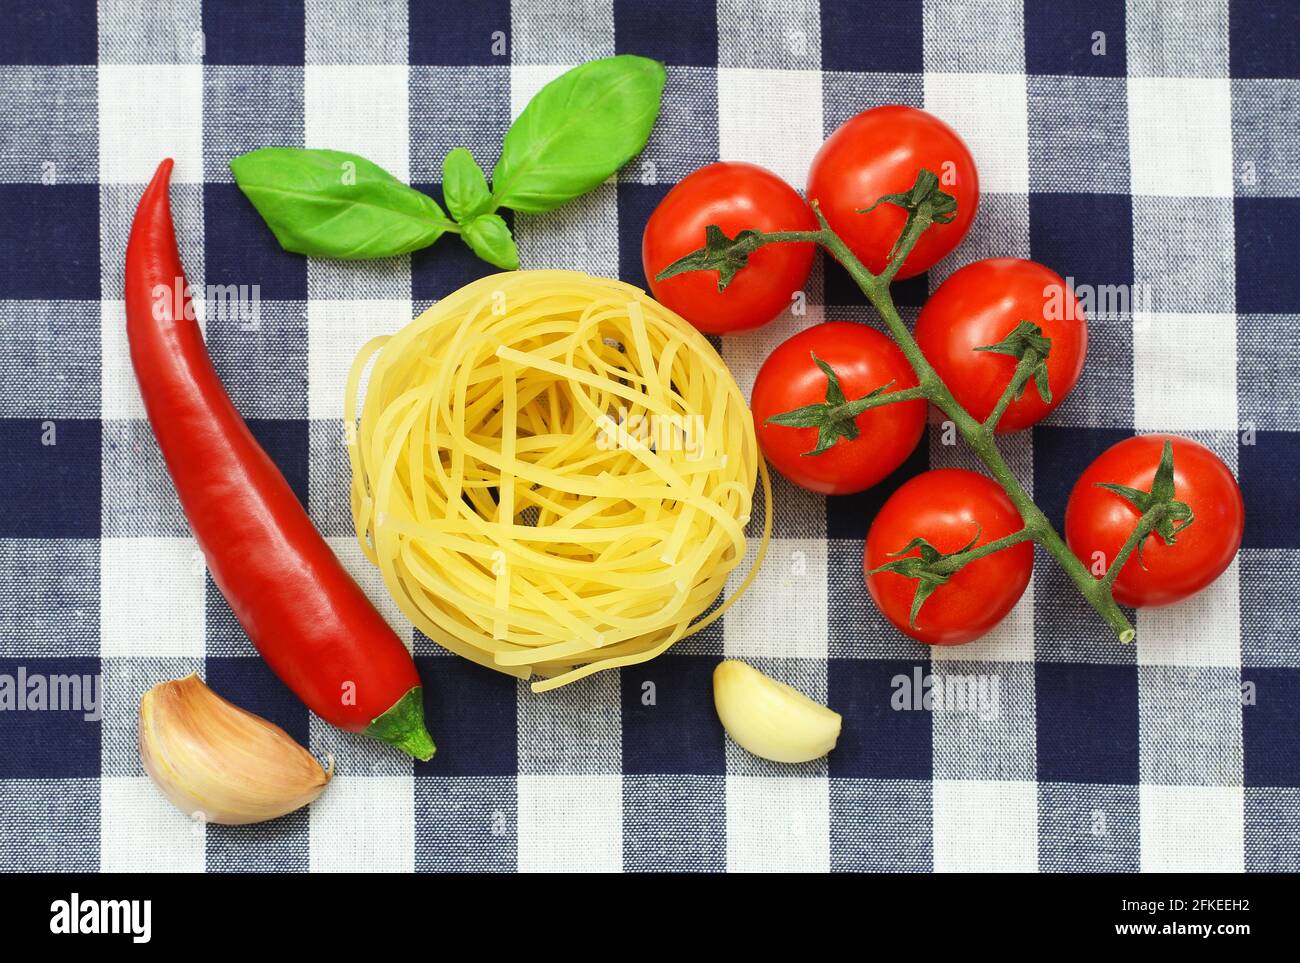 Selection of pasta ingredients: tagliatelle, cherry tomatoes, garlic, chili and fresh basil leaves Stock Photo